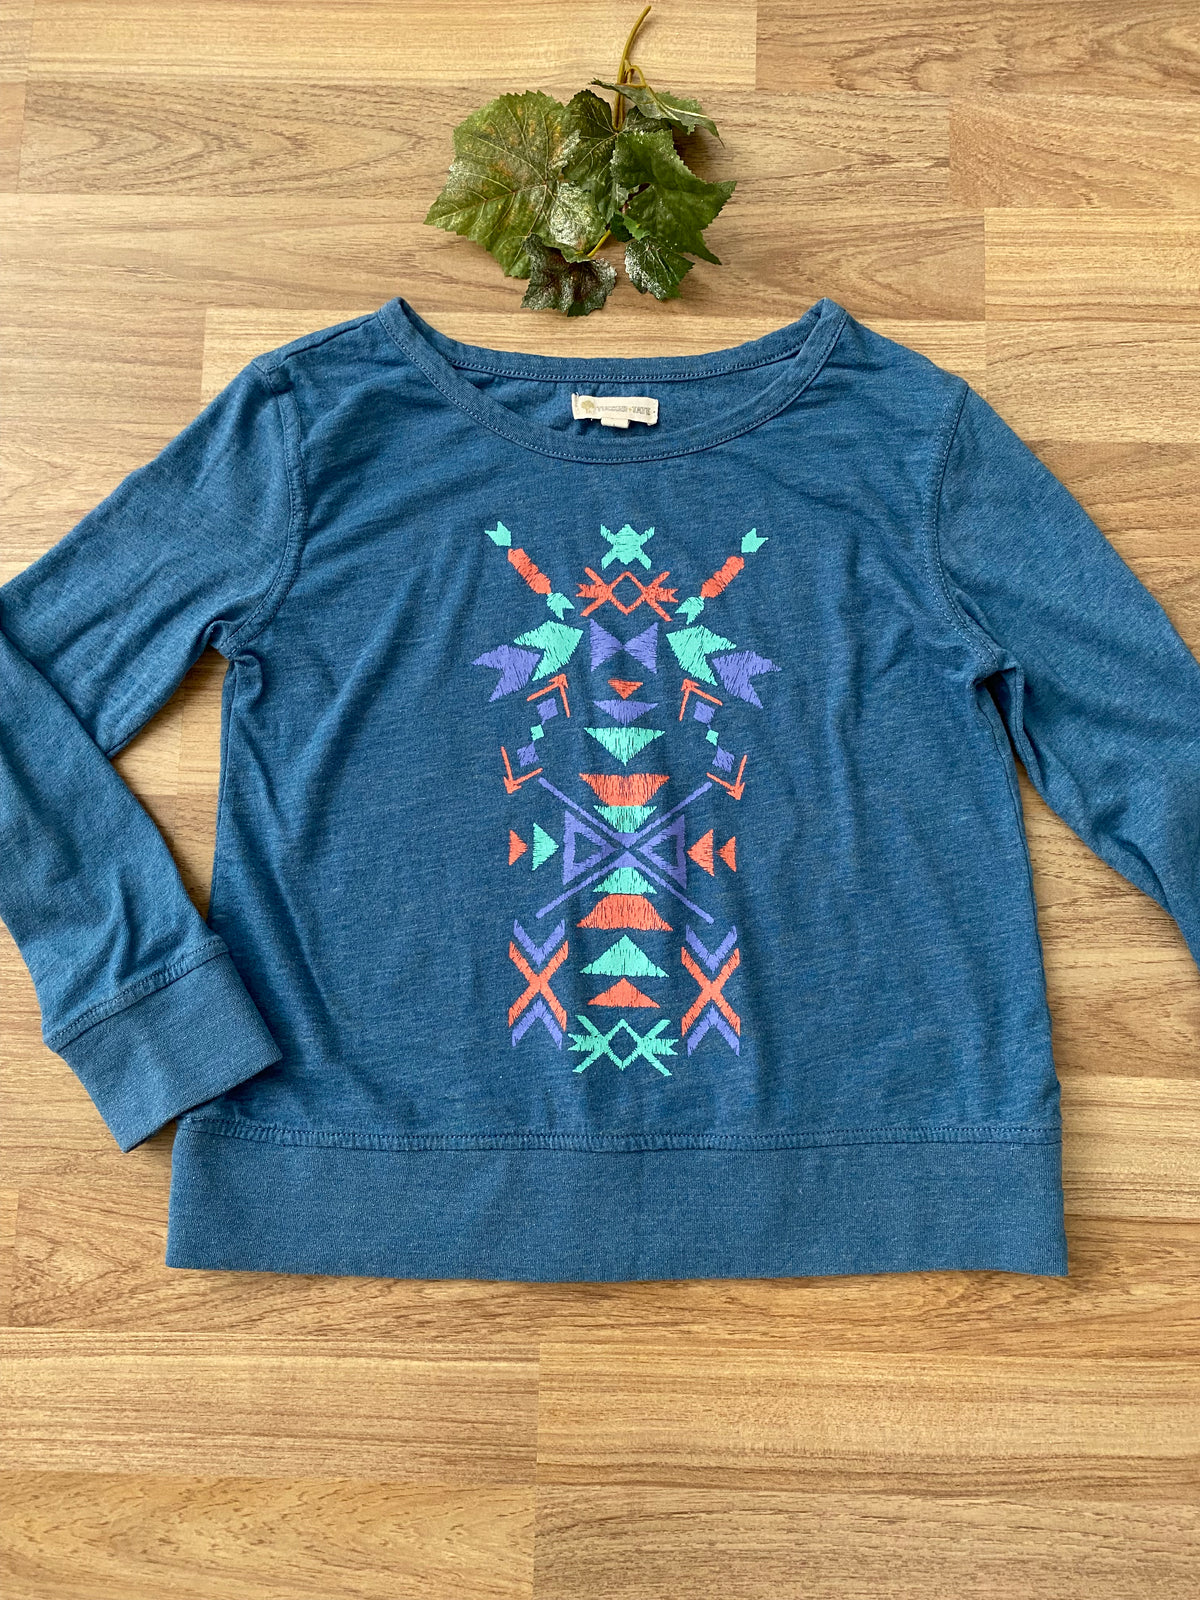 Long Sleeve Graphic Top (Girls Size 10-12)